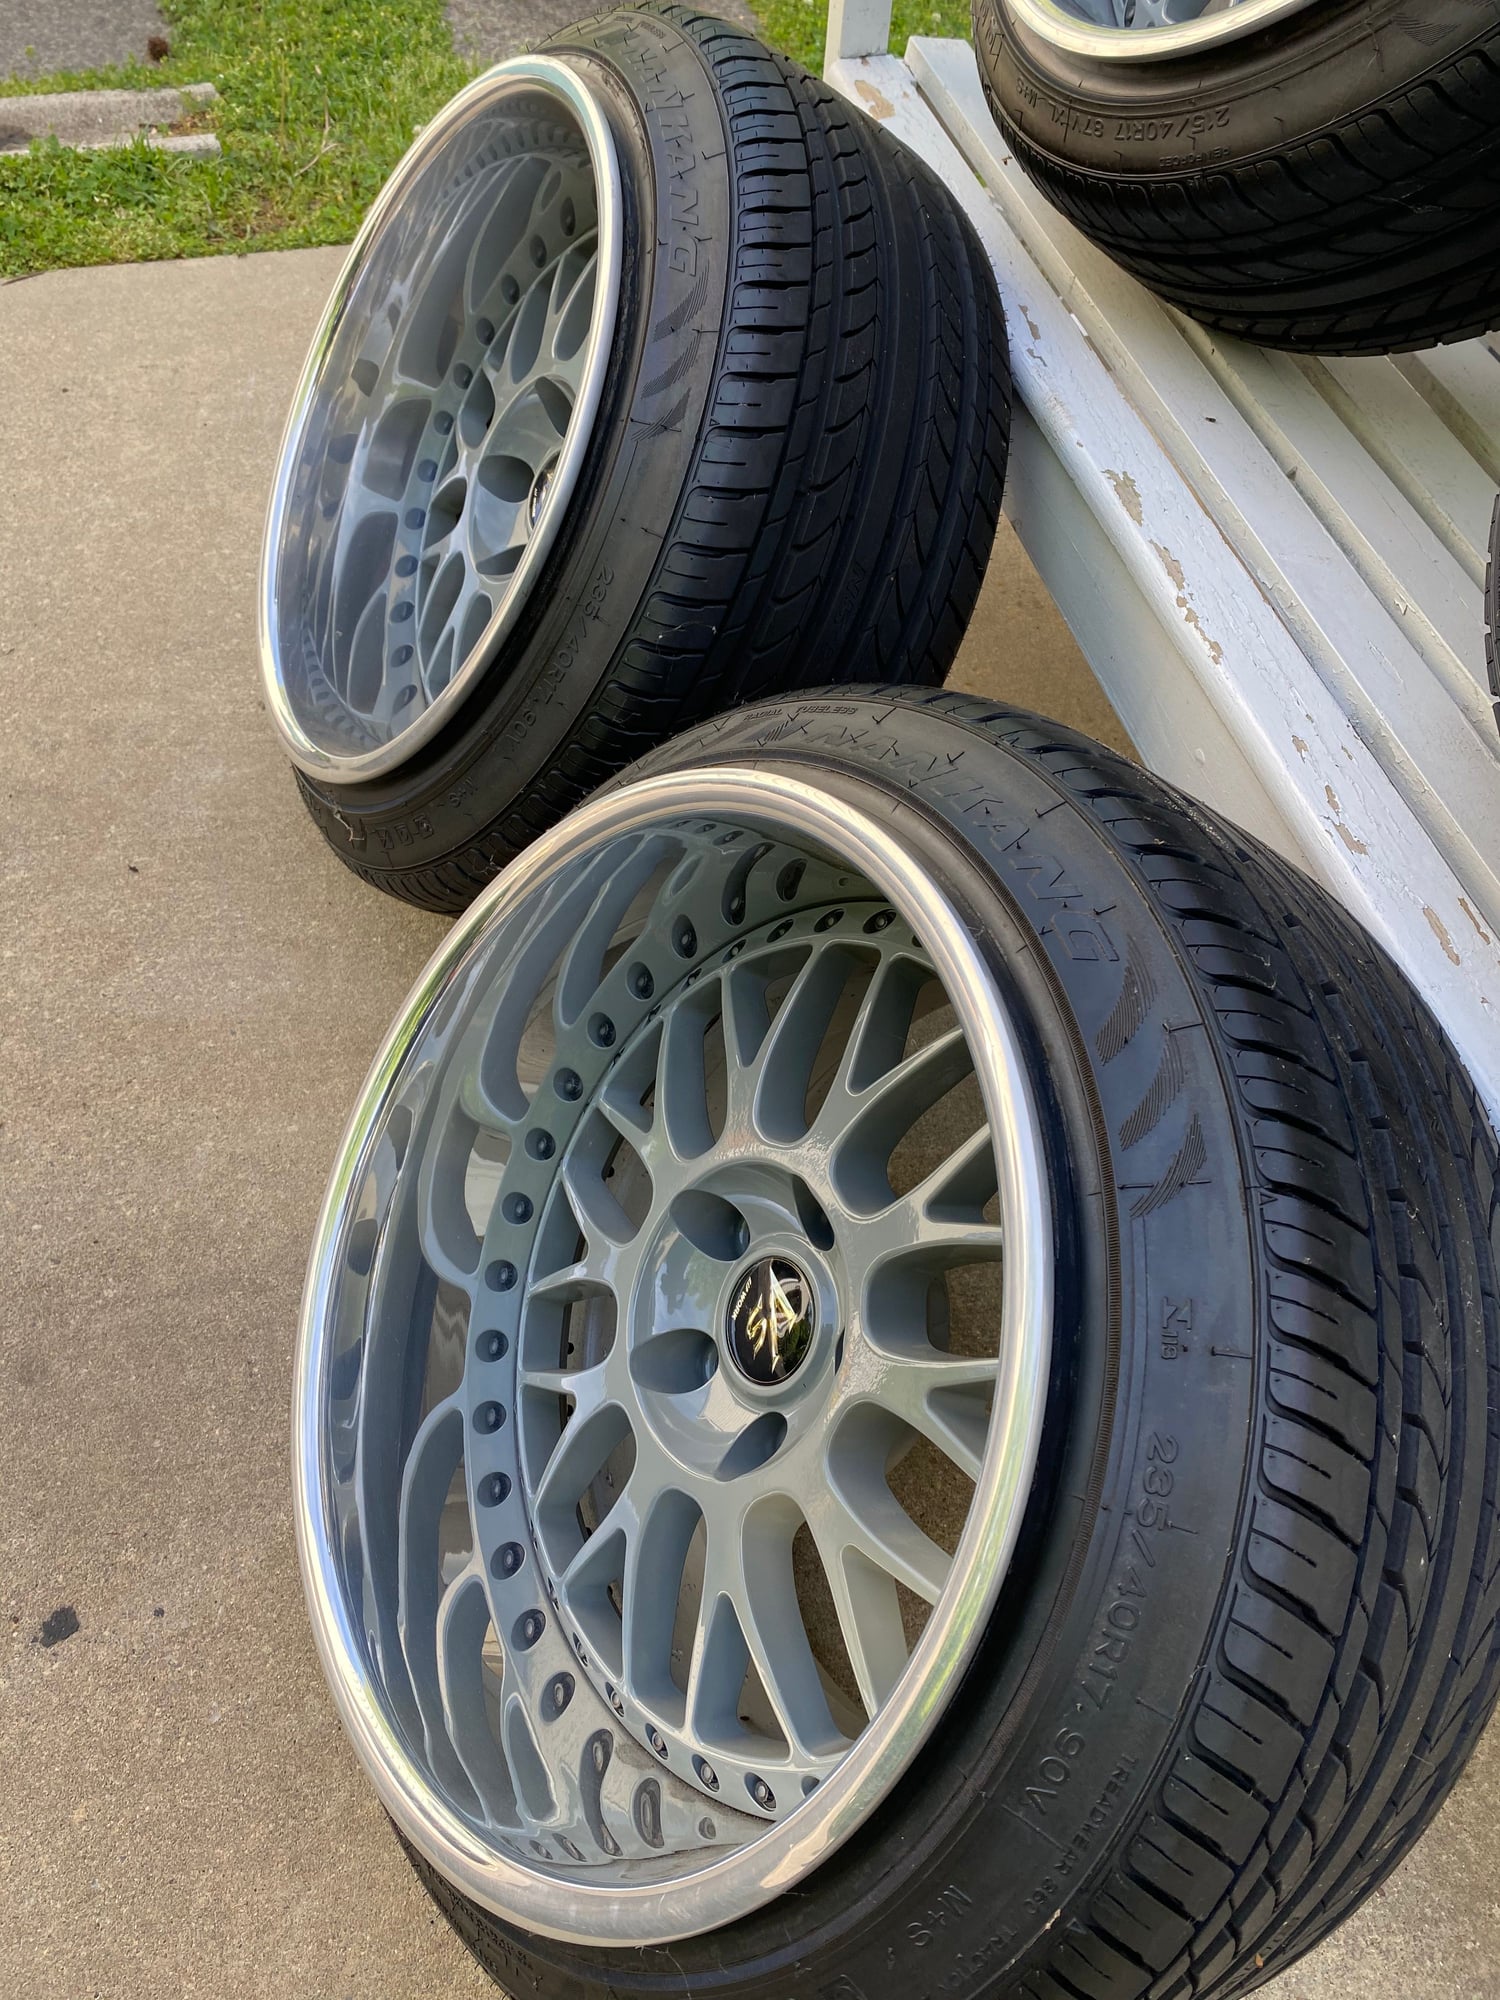 Accessories - Work VS 17 inch rims new powder coat faces and lips. - Used - 1986 to 1995 Mazda RX-7 - Prince Frederick, MD 20678, United States